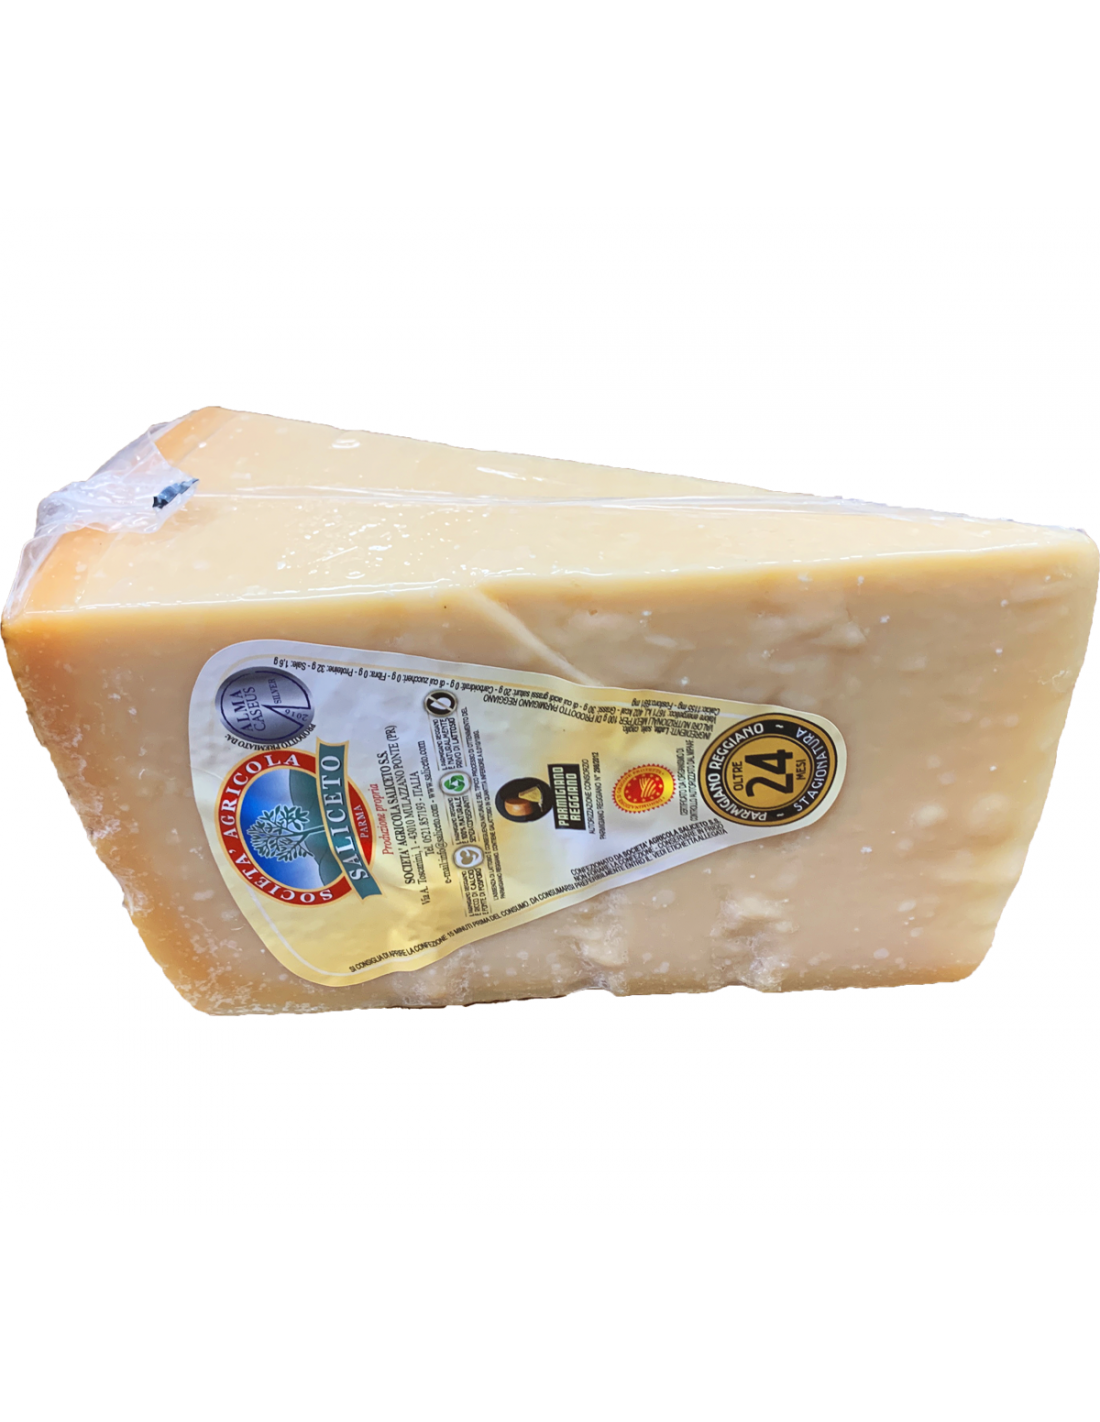 1 Punta Parmigiano Reggiano PDO with Cheese Grater and Knife